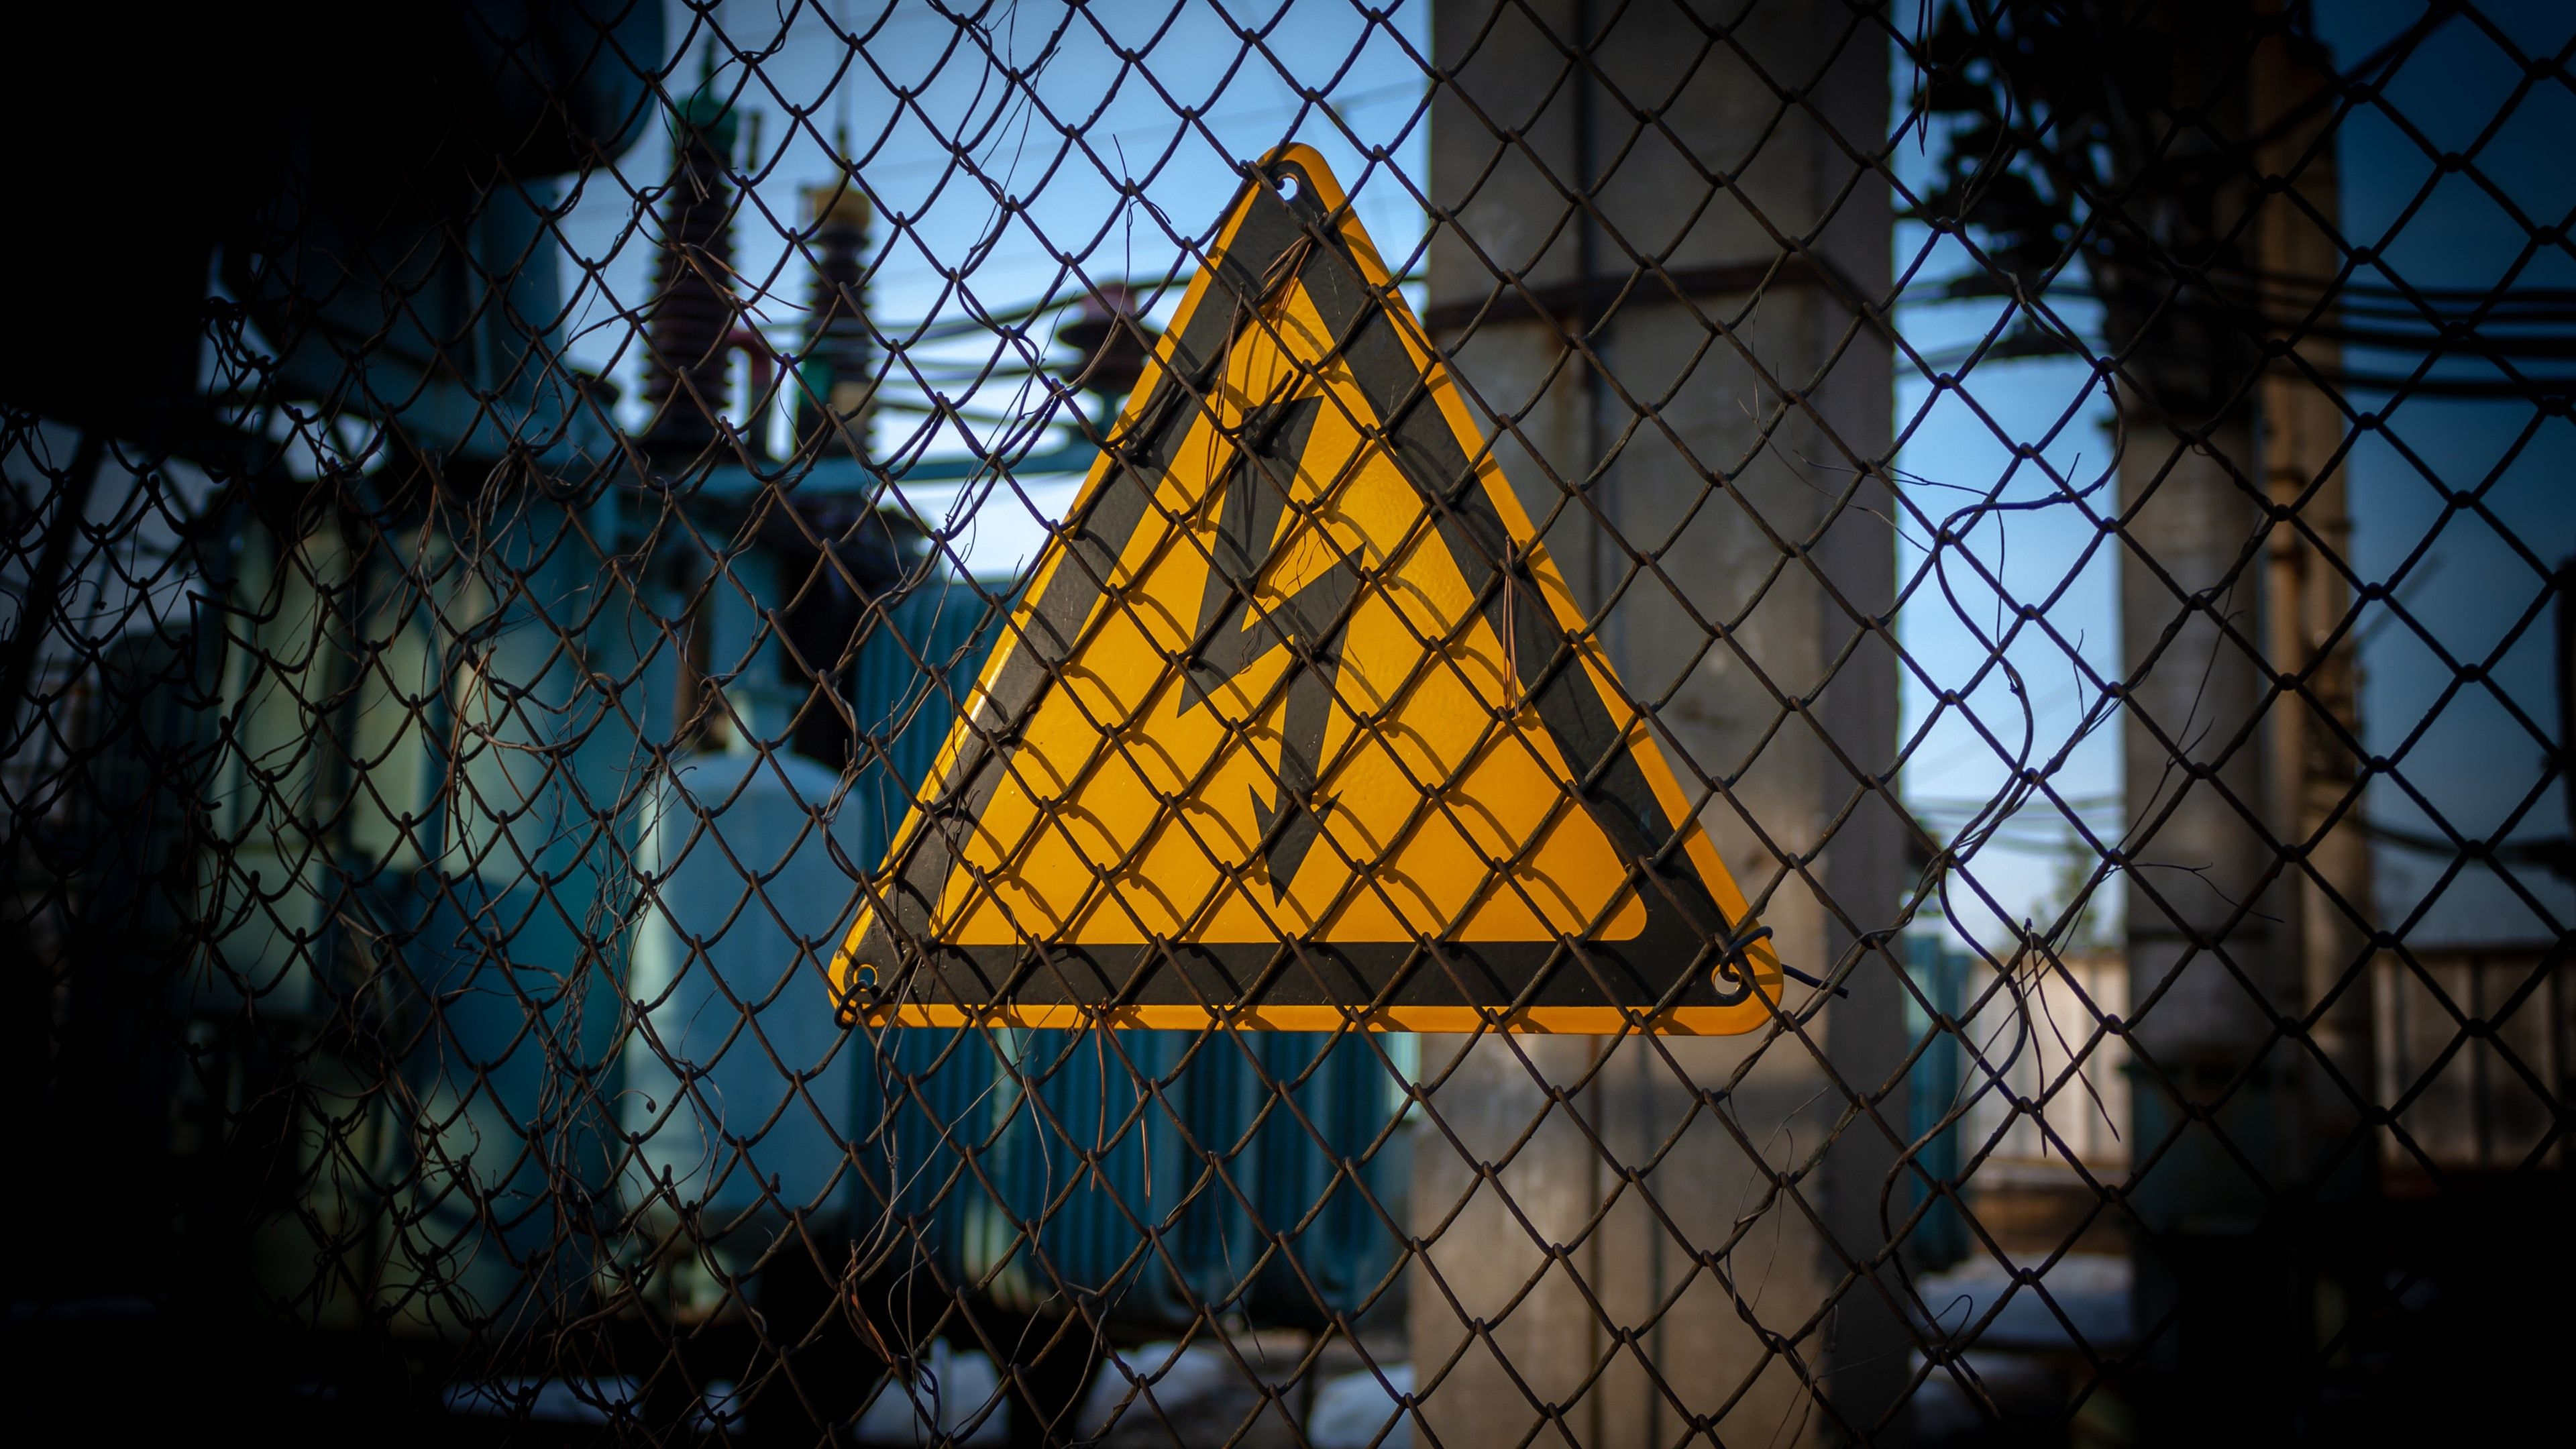 Wallpaper Wire fence, electricity warning sign 3840x2160 UHD 4K Picture, Image